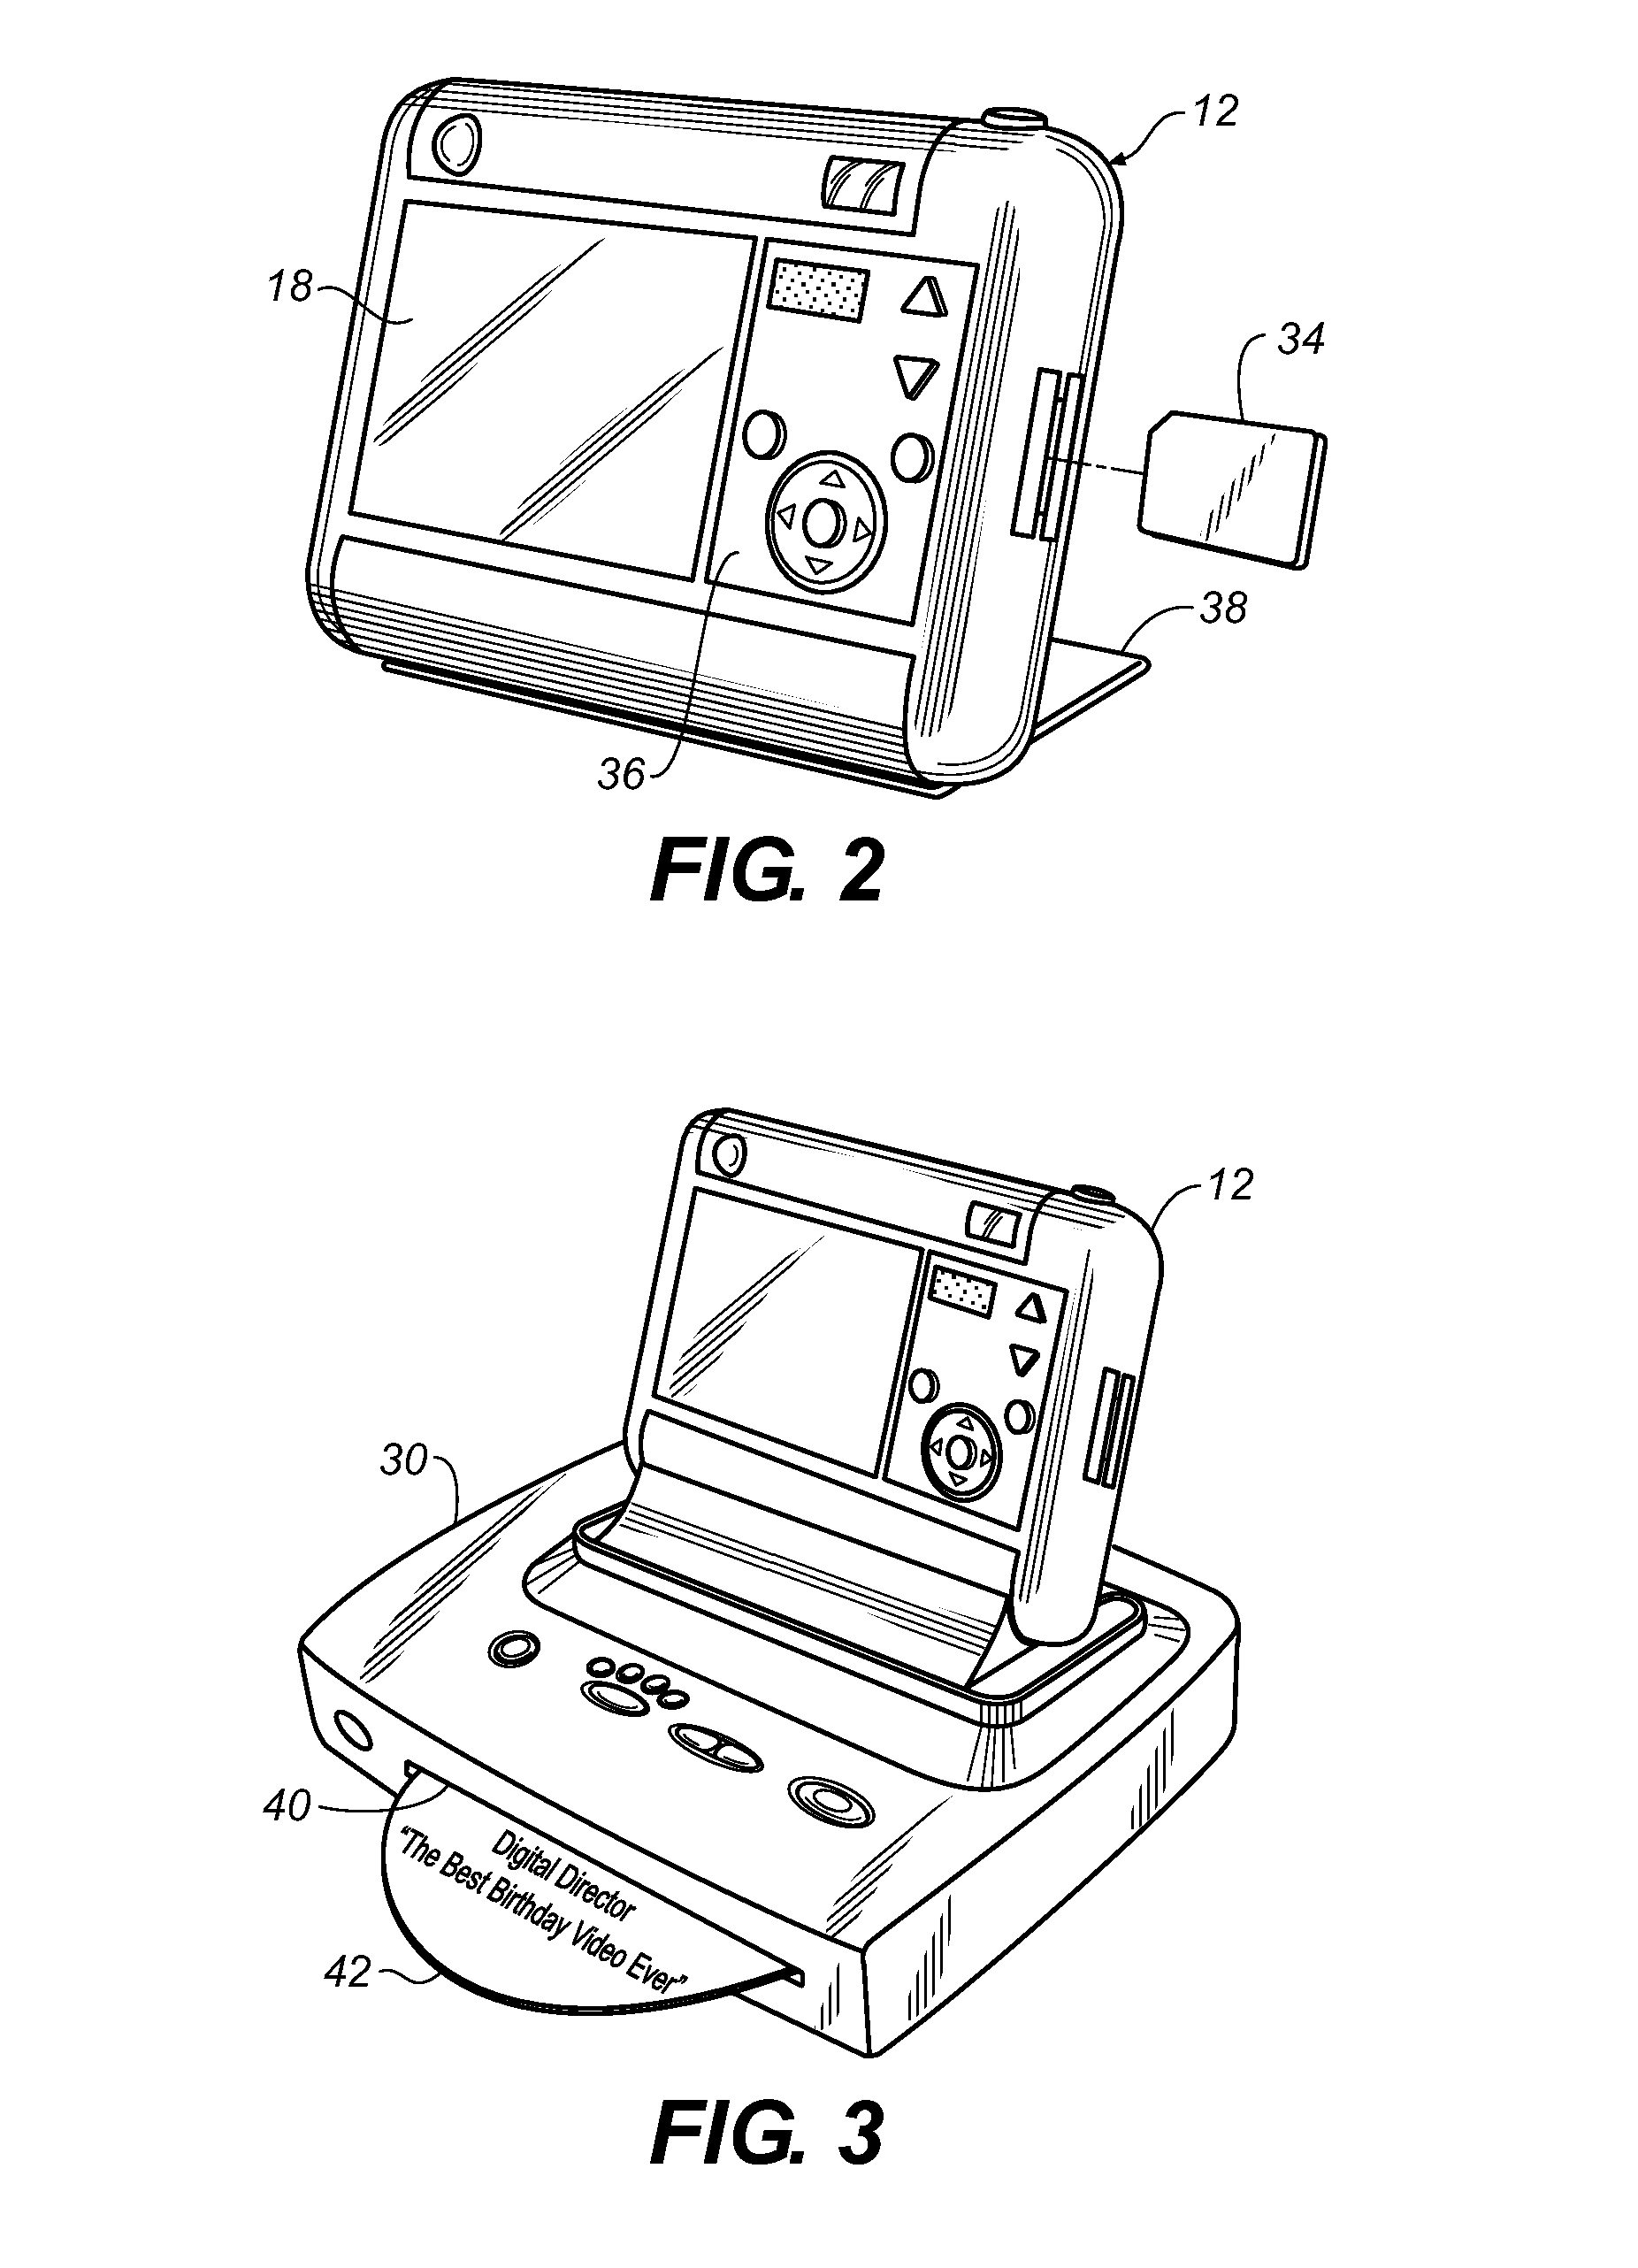 Digital video system for assembling video sequences